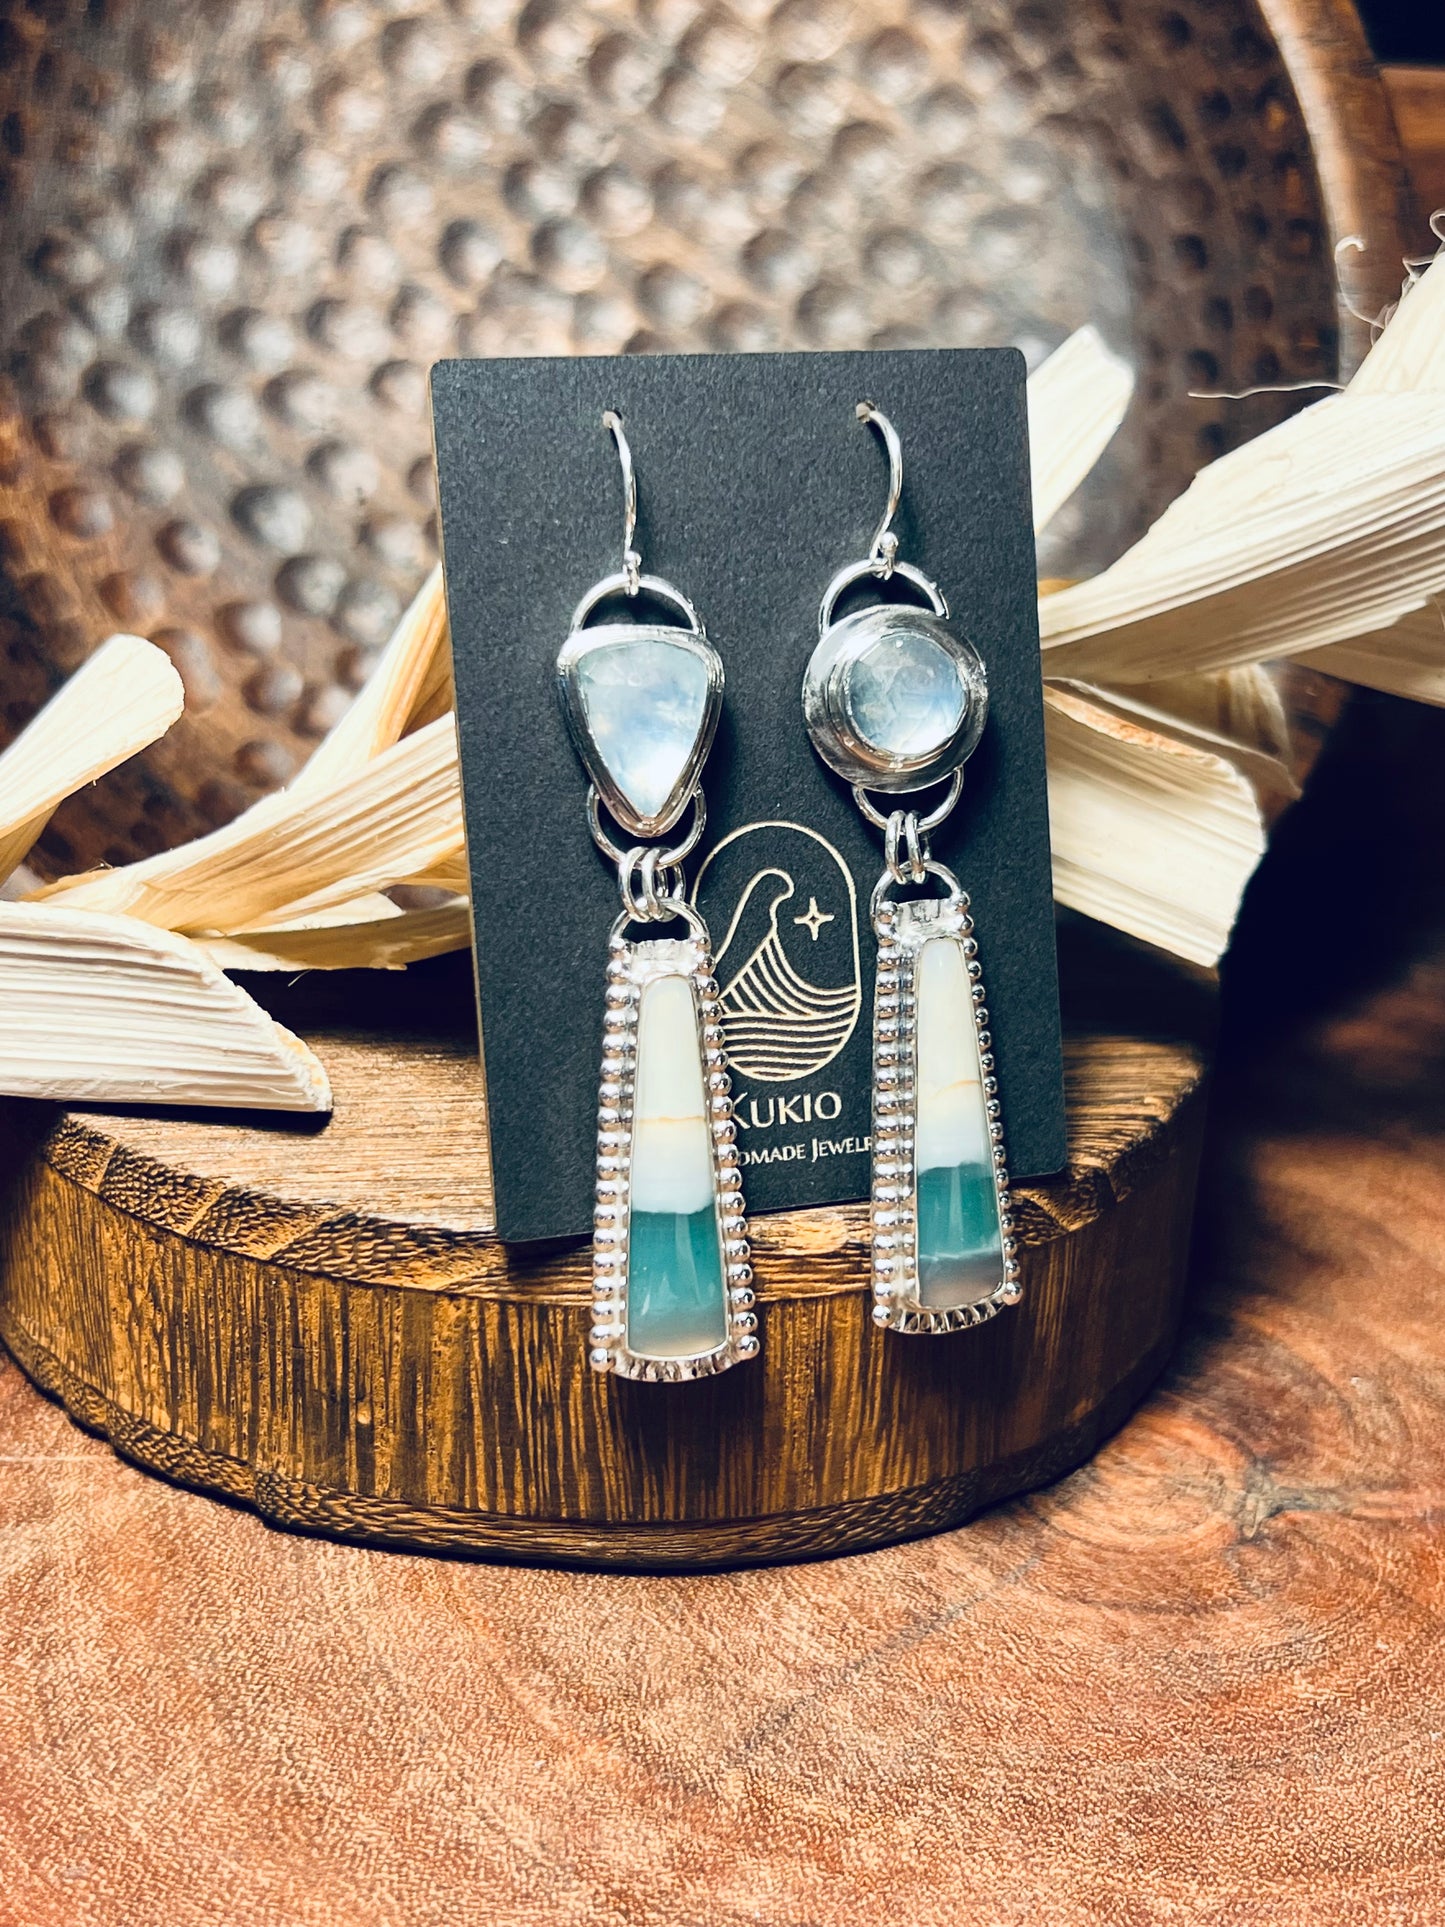 Blue Opalized Wood and Aquamarine Sterling Silver Earrings